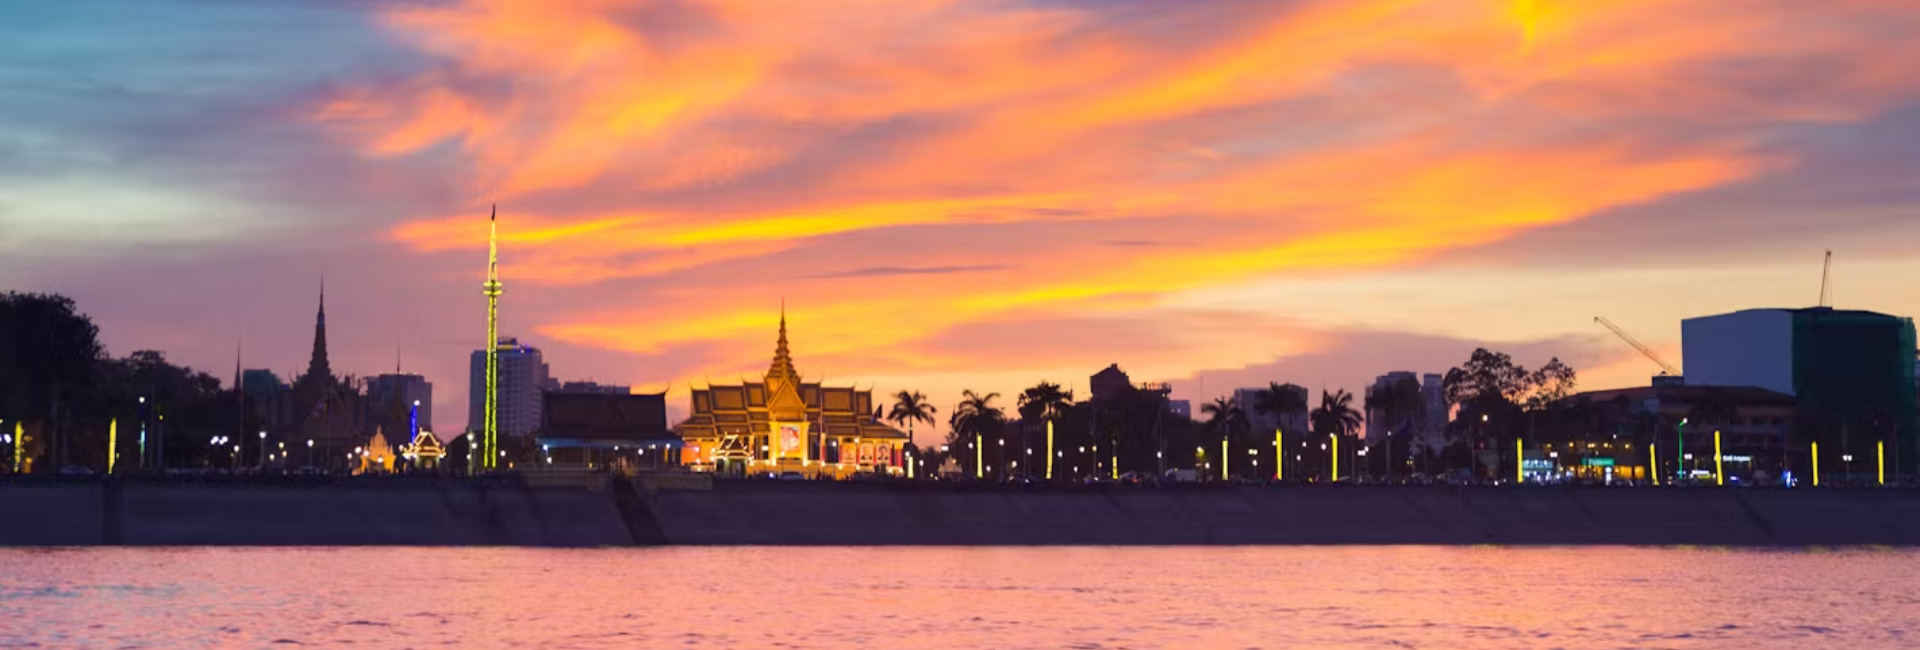 Sisowath Quay: A Must-Visit Destination in Phnom Penh, Cambodia – Have you checked it out?